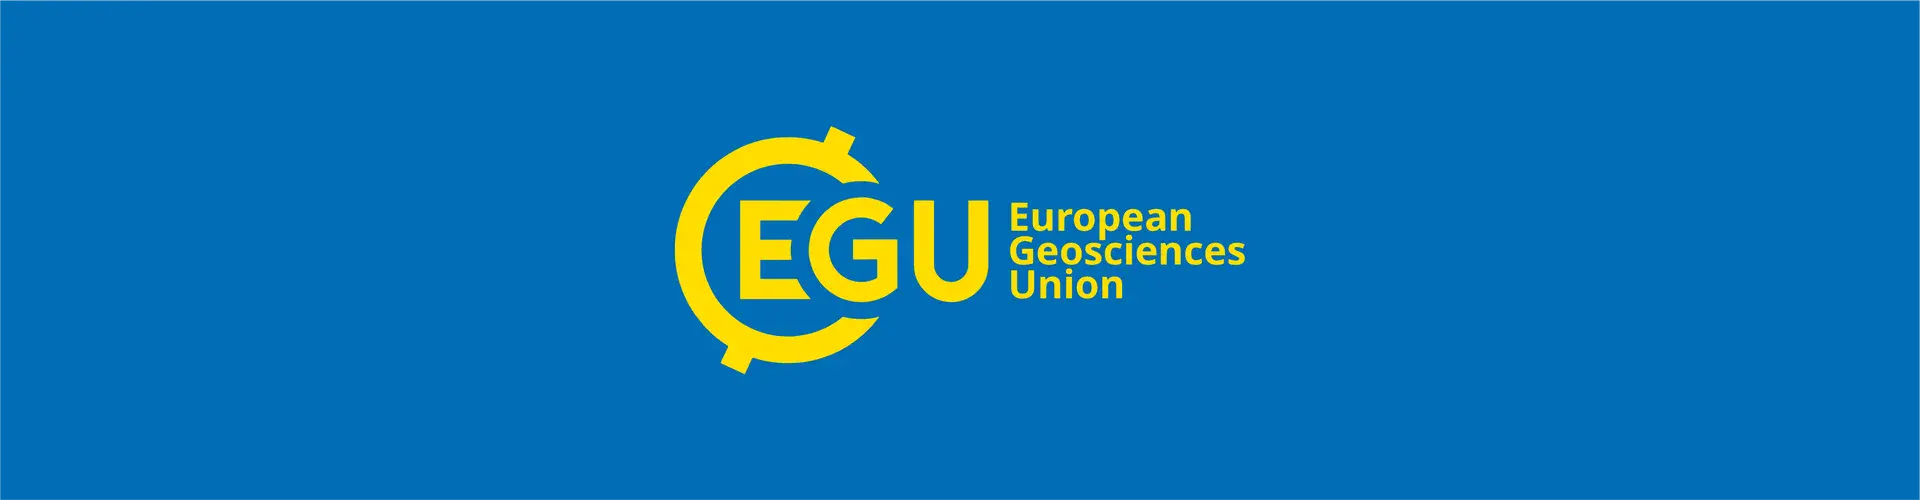 EGU logo blue and yellow 1920x500.png